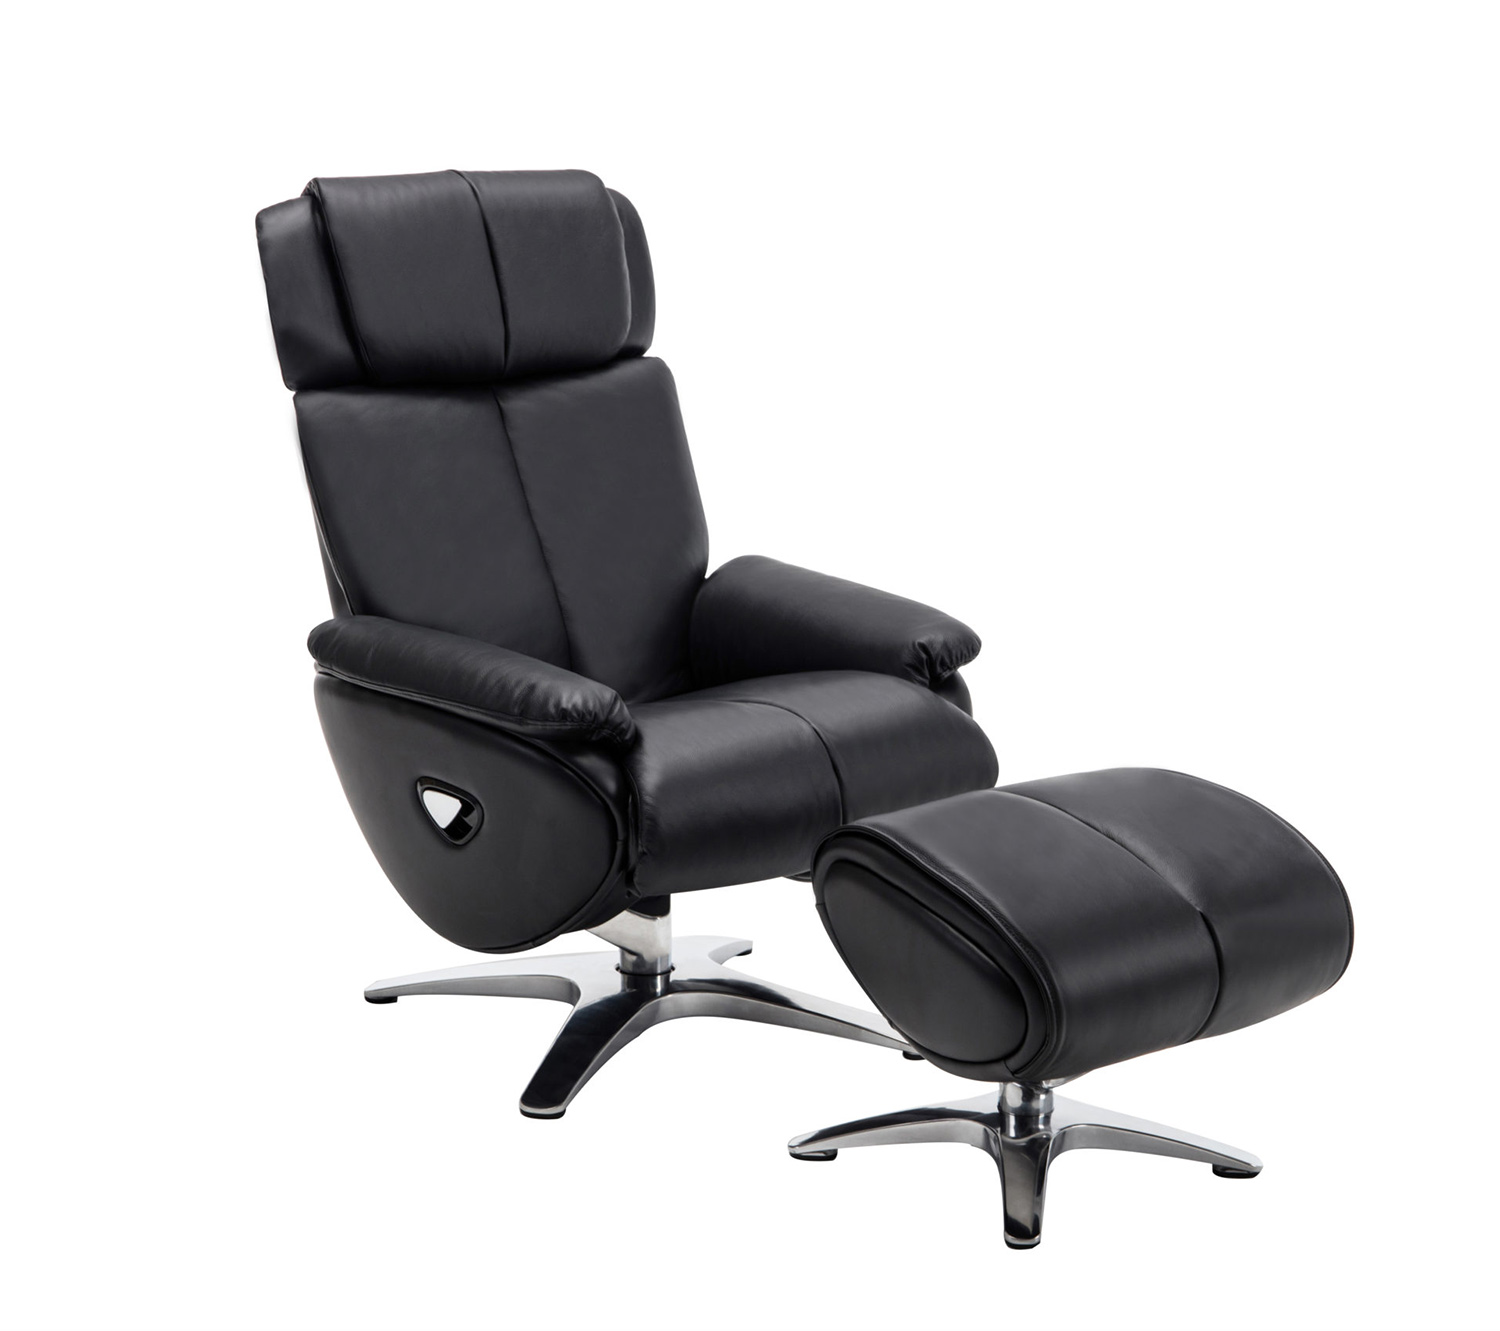 Barcalounger Emery Pedestal Recliner Chair with Adjustable Head Rest and Adjustable Ottoman - Capri Black/leather match